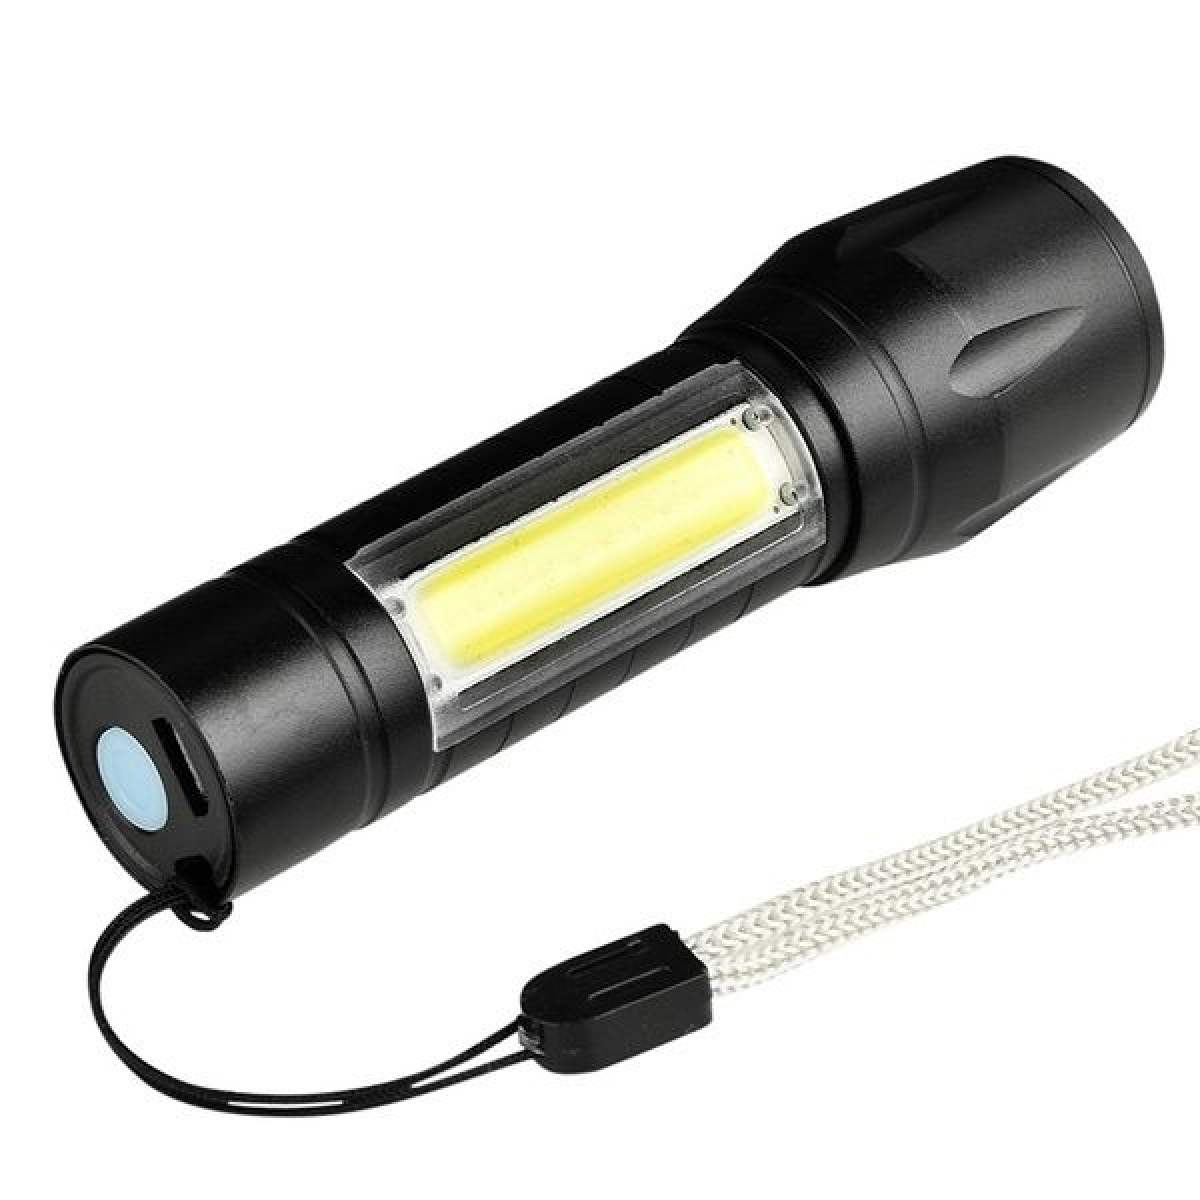 Zoomable Rechargeable LED Torch - Micro USB Charging with Cable and Case - Stainless Steel Design